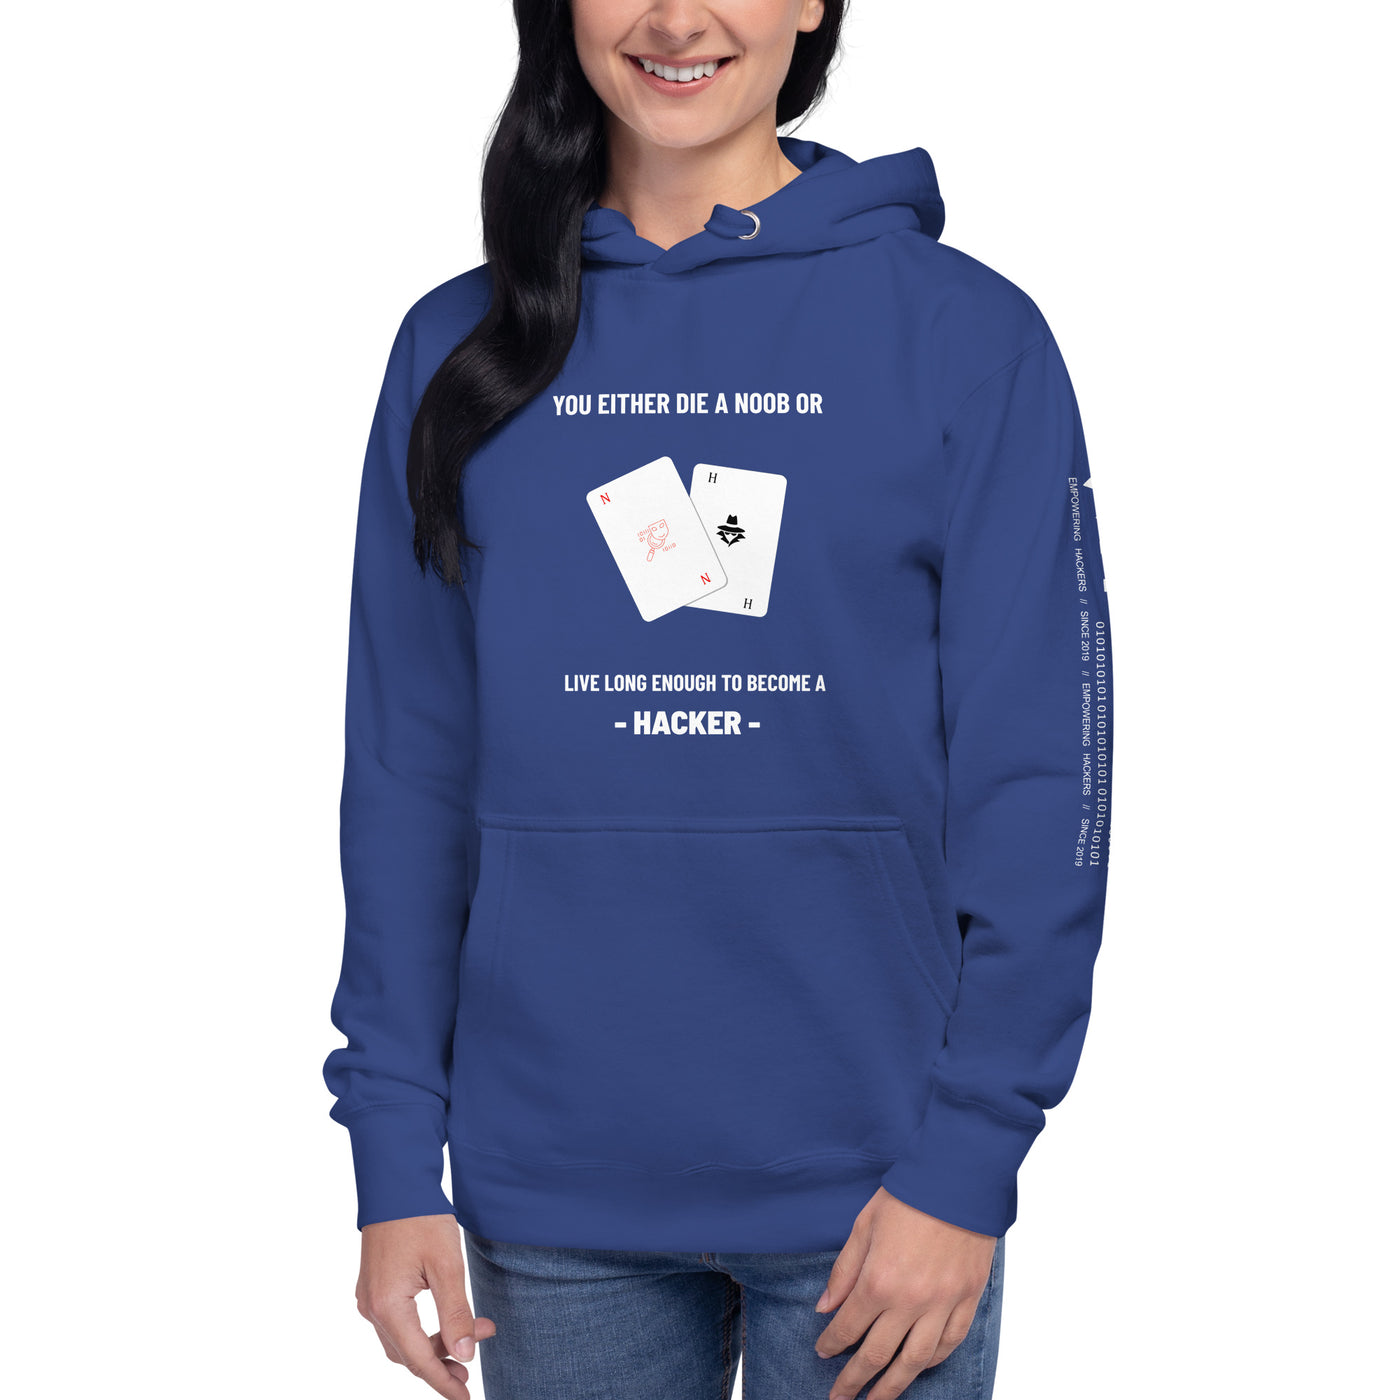 You either die a noob or live long enough to become a hacker - Unisex Hoodie